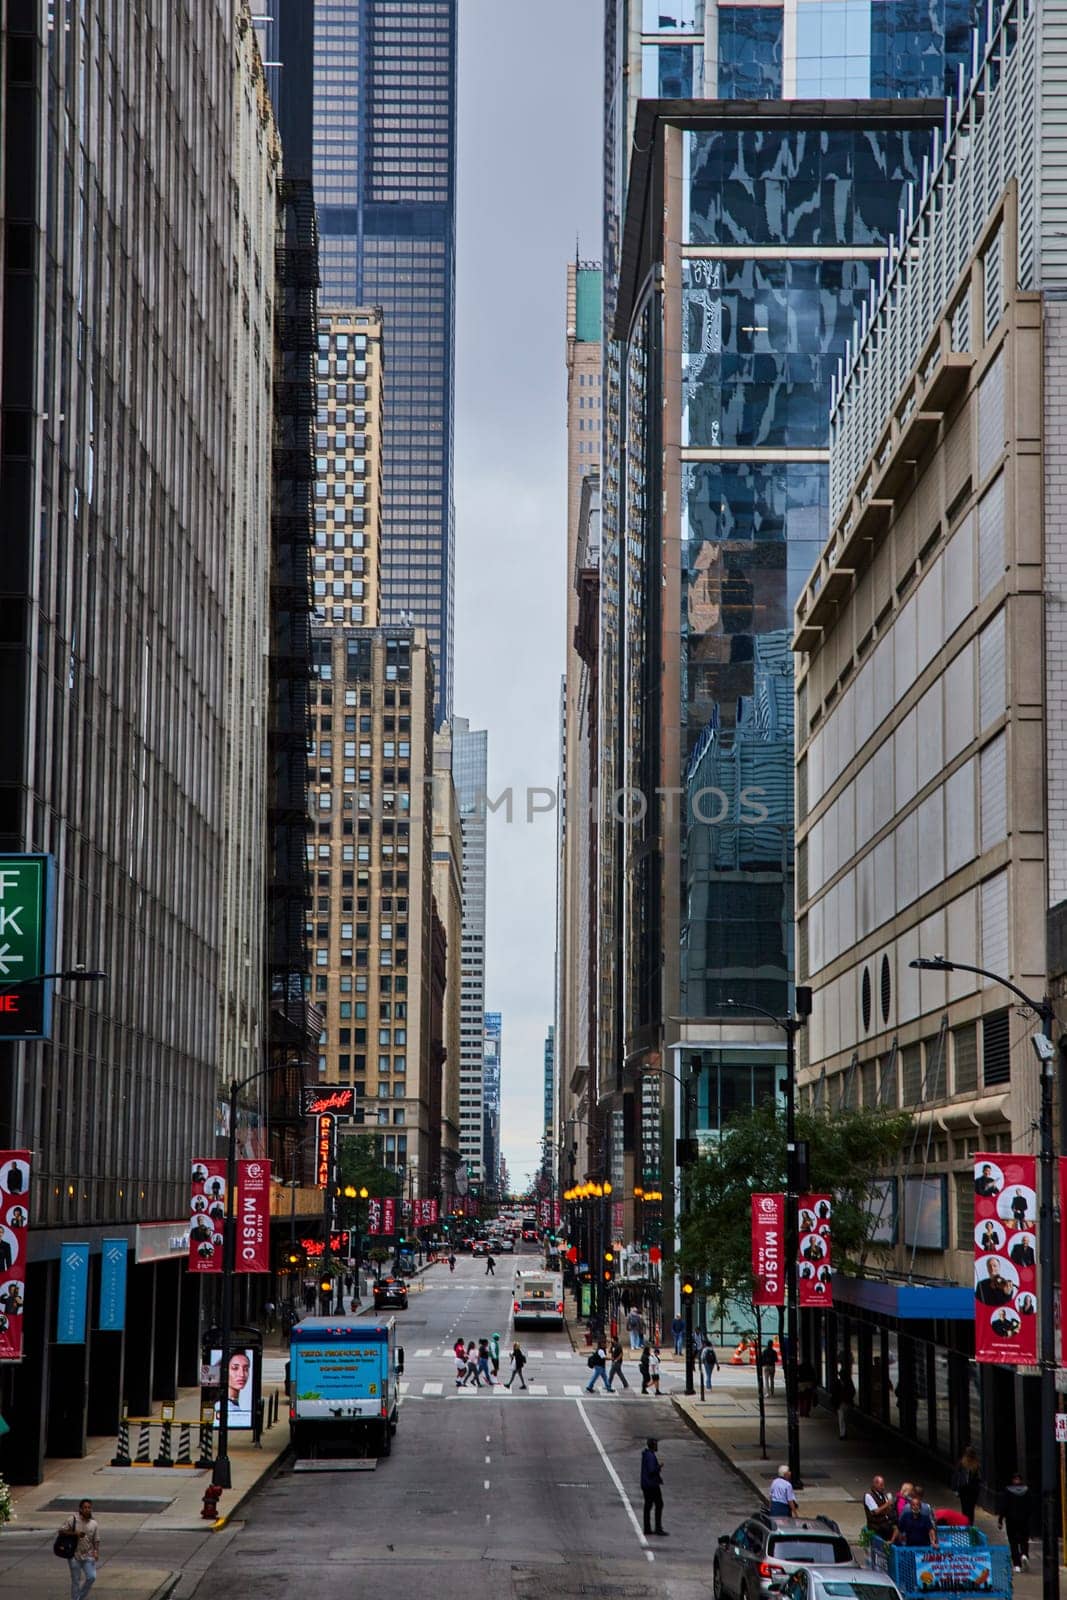 Image of Tourists and pedestrians on Chicago street corridor between skyscraper buildings on gloomy day